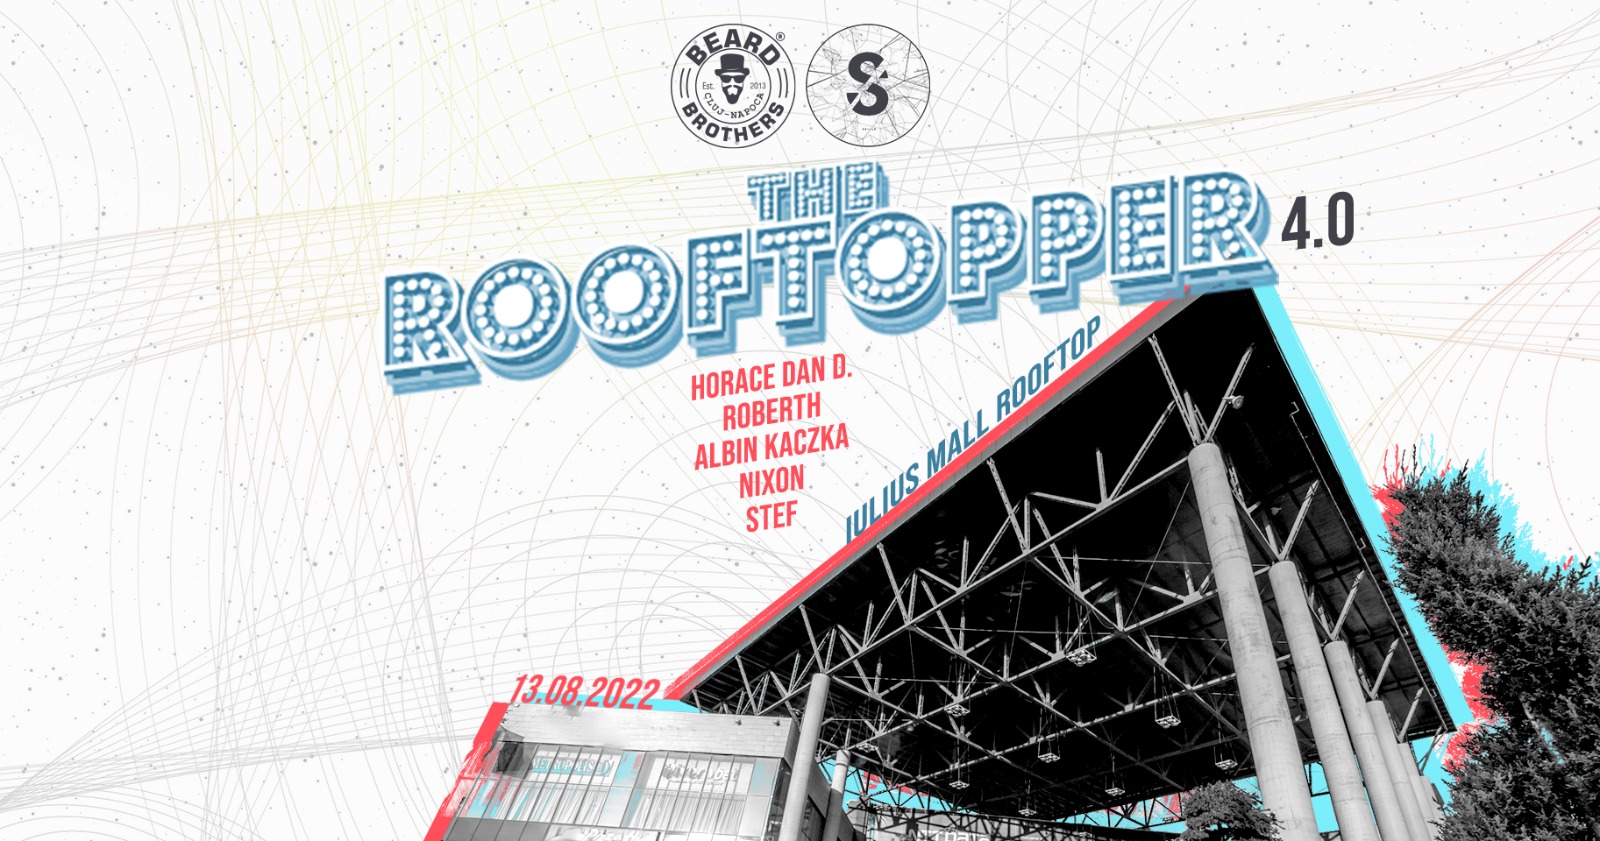 The Rooftopper 4.0